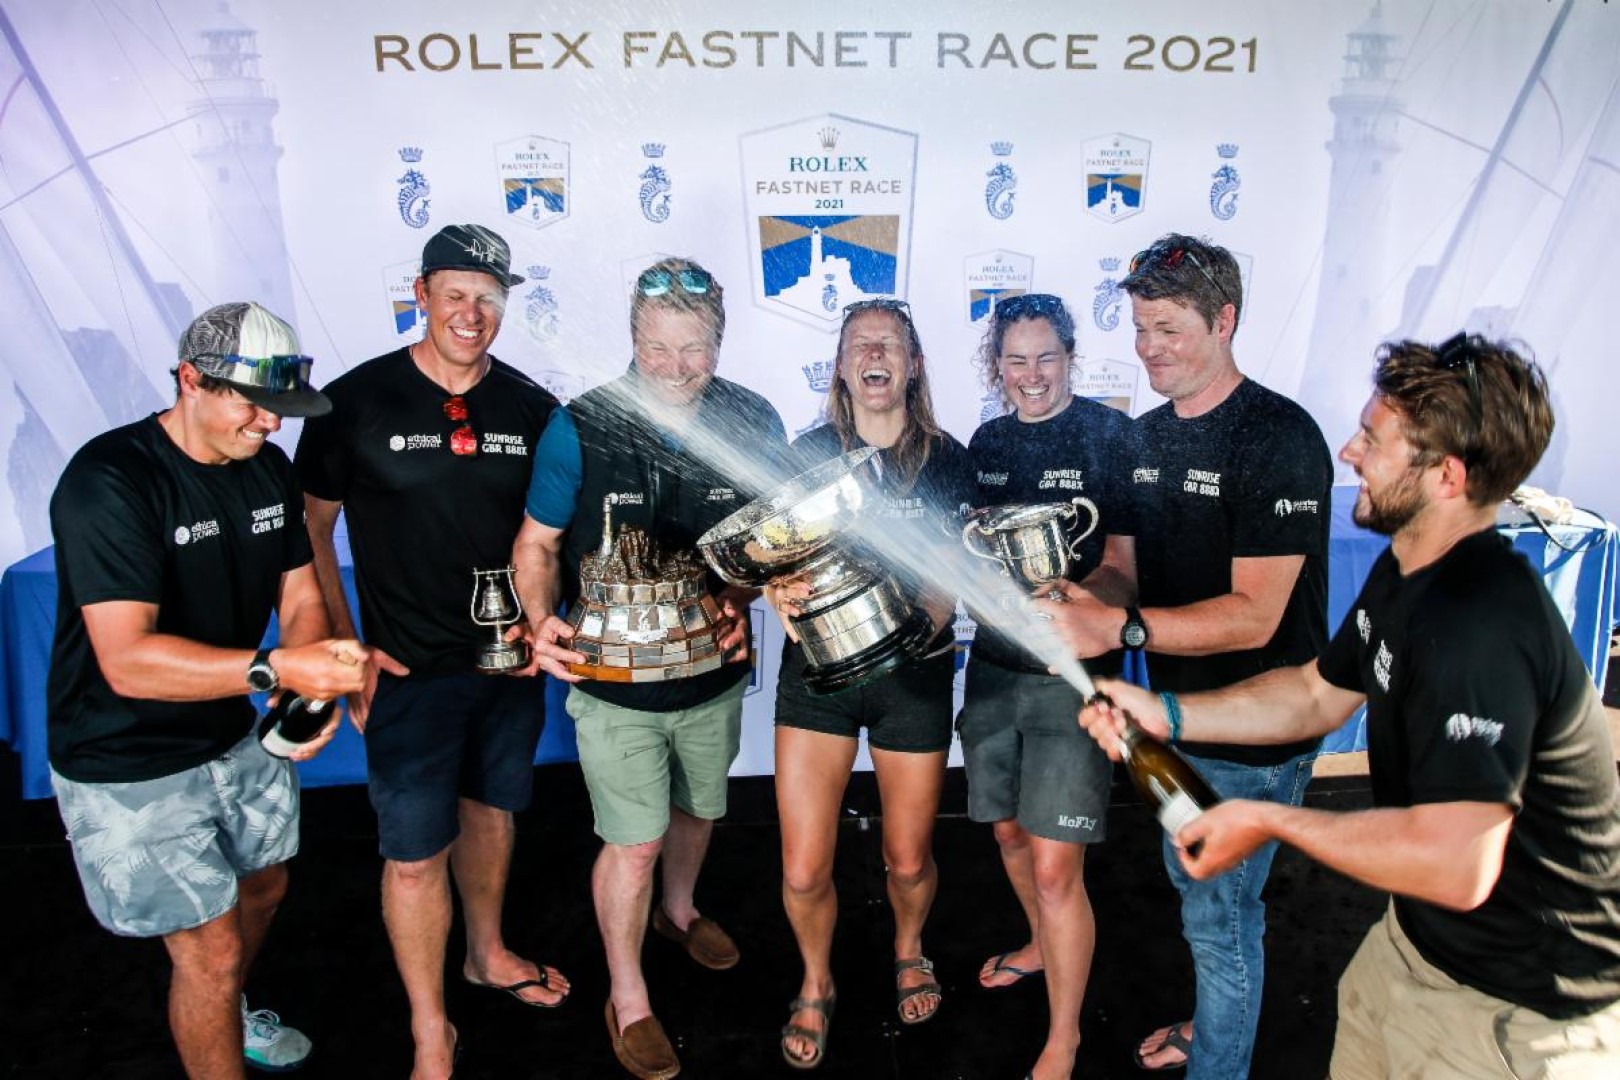 Back to defend their title in 2023: Tom Kneen's JPK 11.80 Sunrise were victorious in the 2021 Rolex Fastnet Race, winning the Fastnet Challenge Cup for IRC Overall © Paul Wyeth